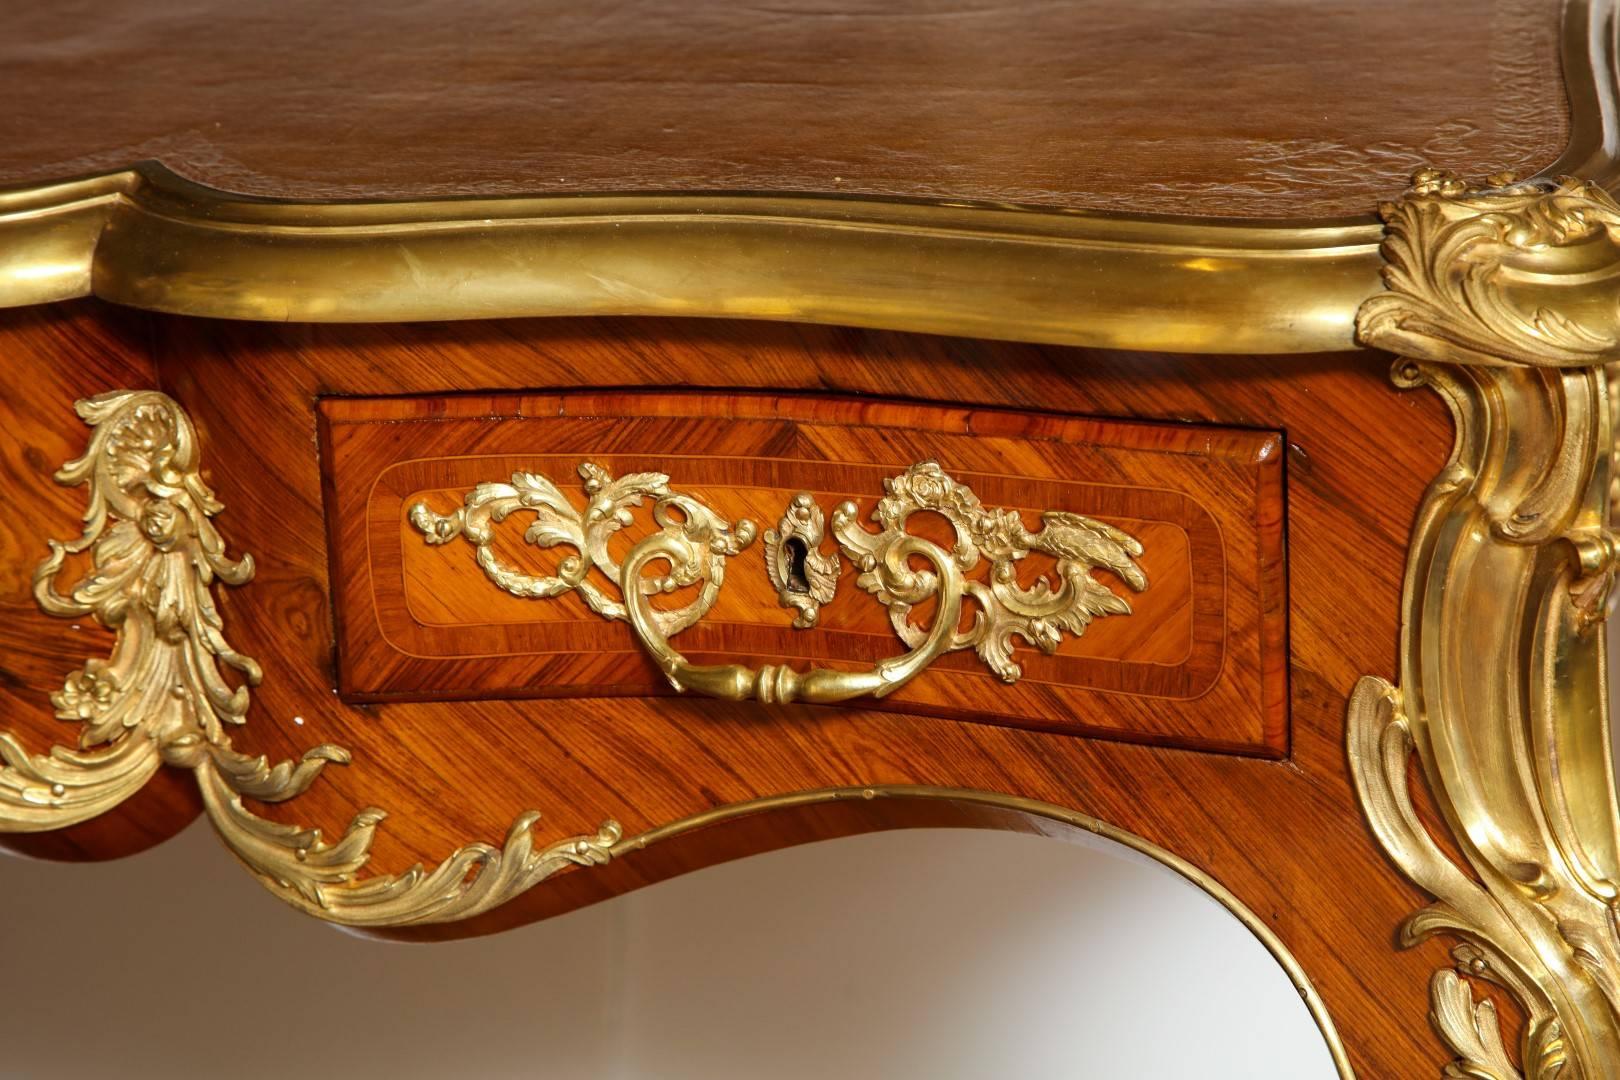 A French ormolu-mounted tulipwood parquetry bureau plat, rectangular ormolu moulded top with gilt-tooled camel leather writing surface above a shaped frieze set with central drawer and flanking damask lined short drawers, the reverse with similar